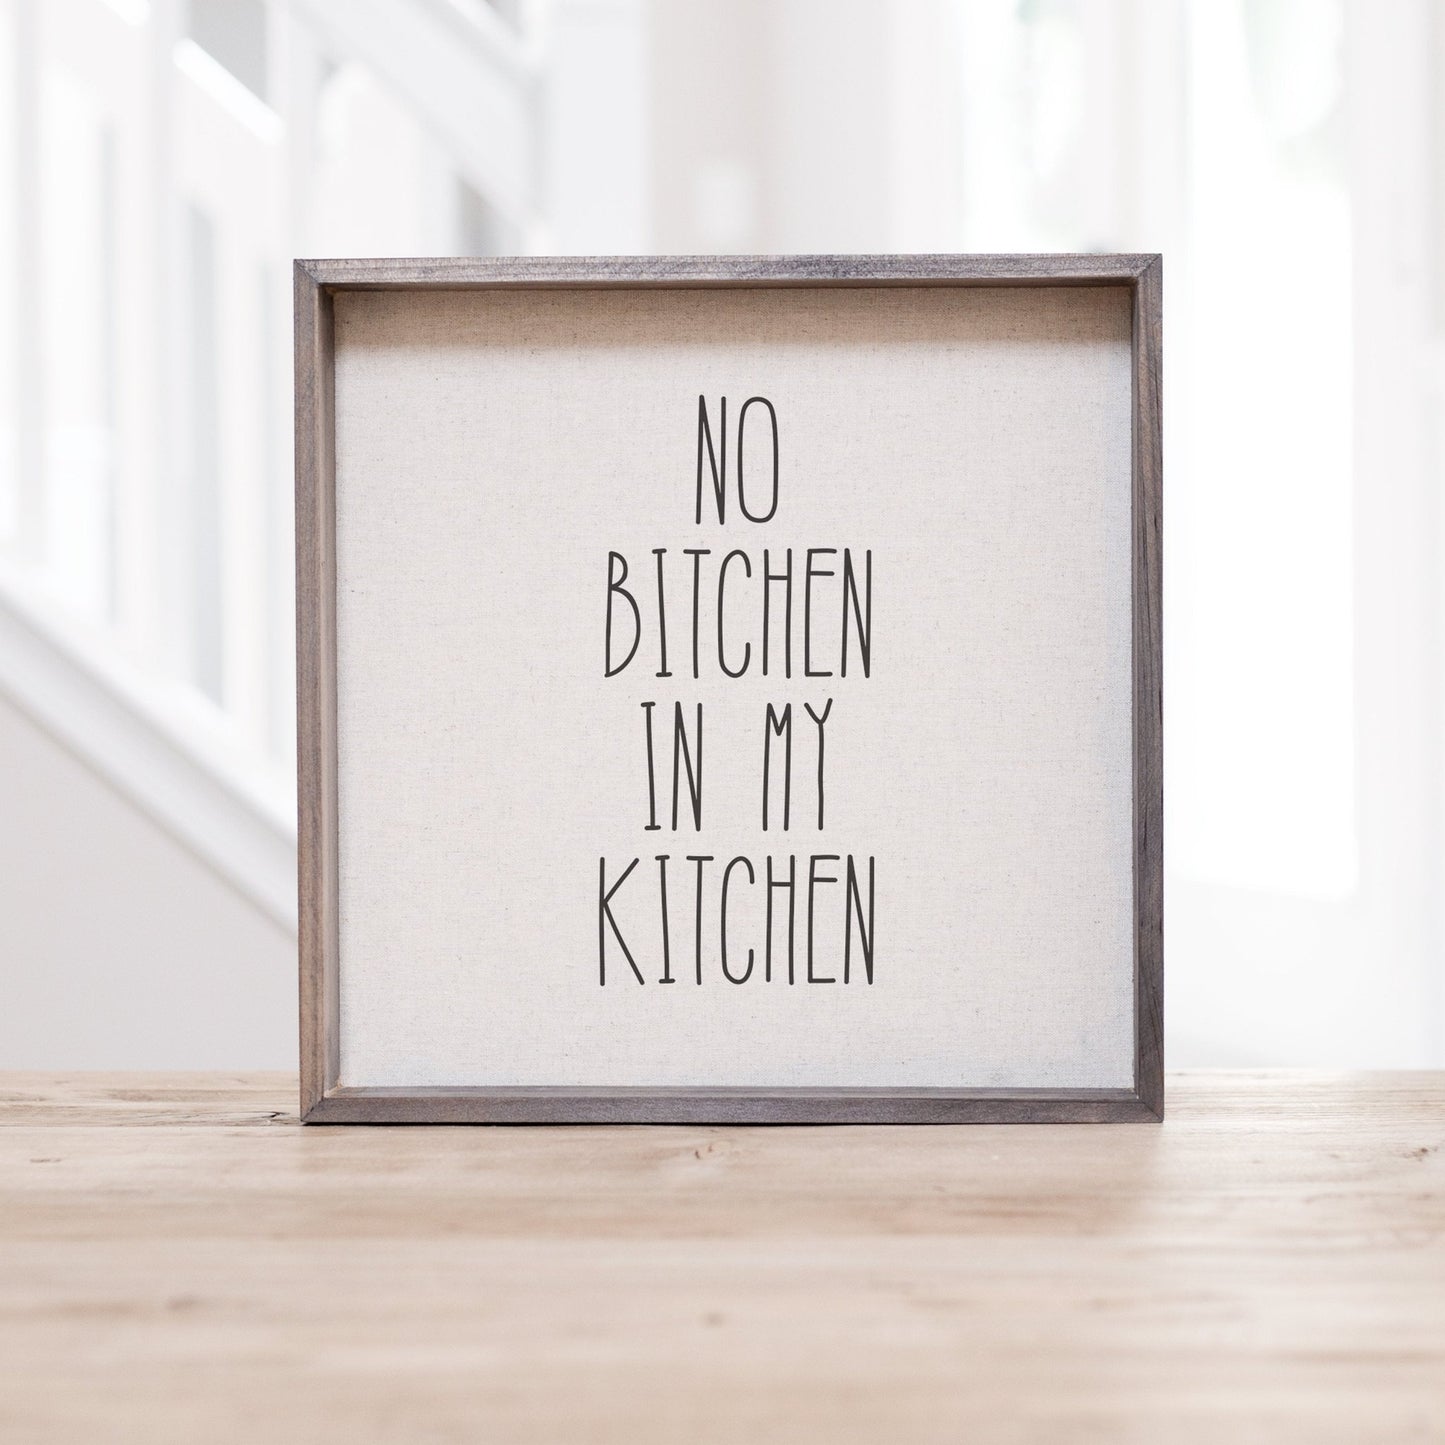 Load image into Gallery viewer, No Bitchen In My Kitchen Sign | Funny Family Kitchen Sign | Kitchen Wall Art | Rustic Kitchen Sign | Funny Kitchen Decor | FarmhouseWoodSign
